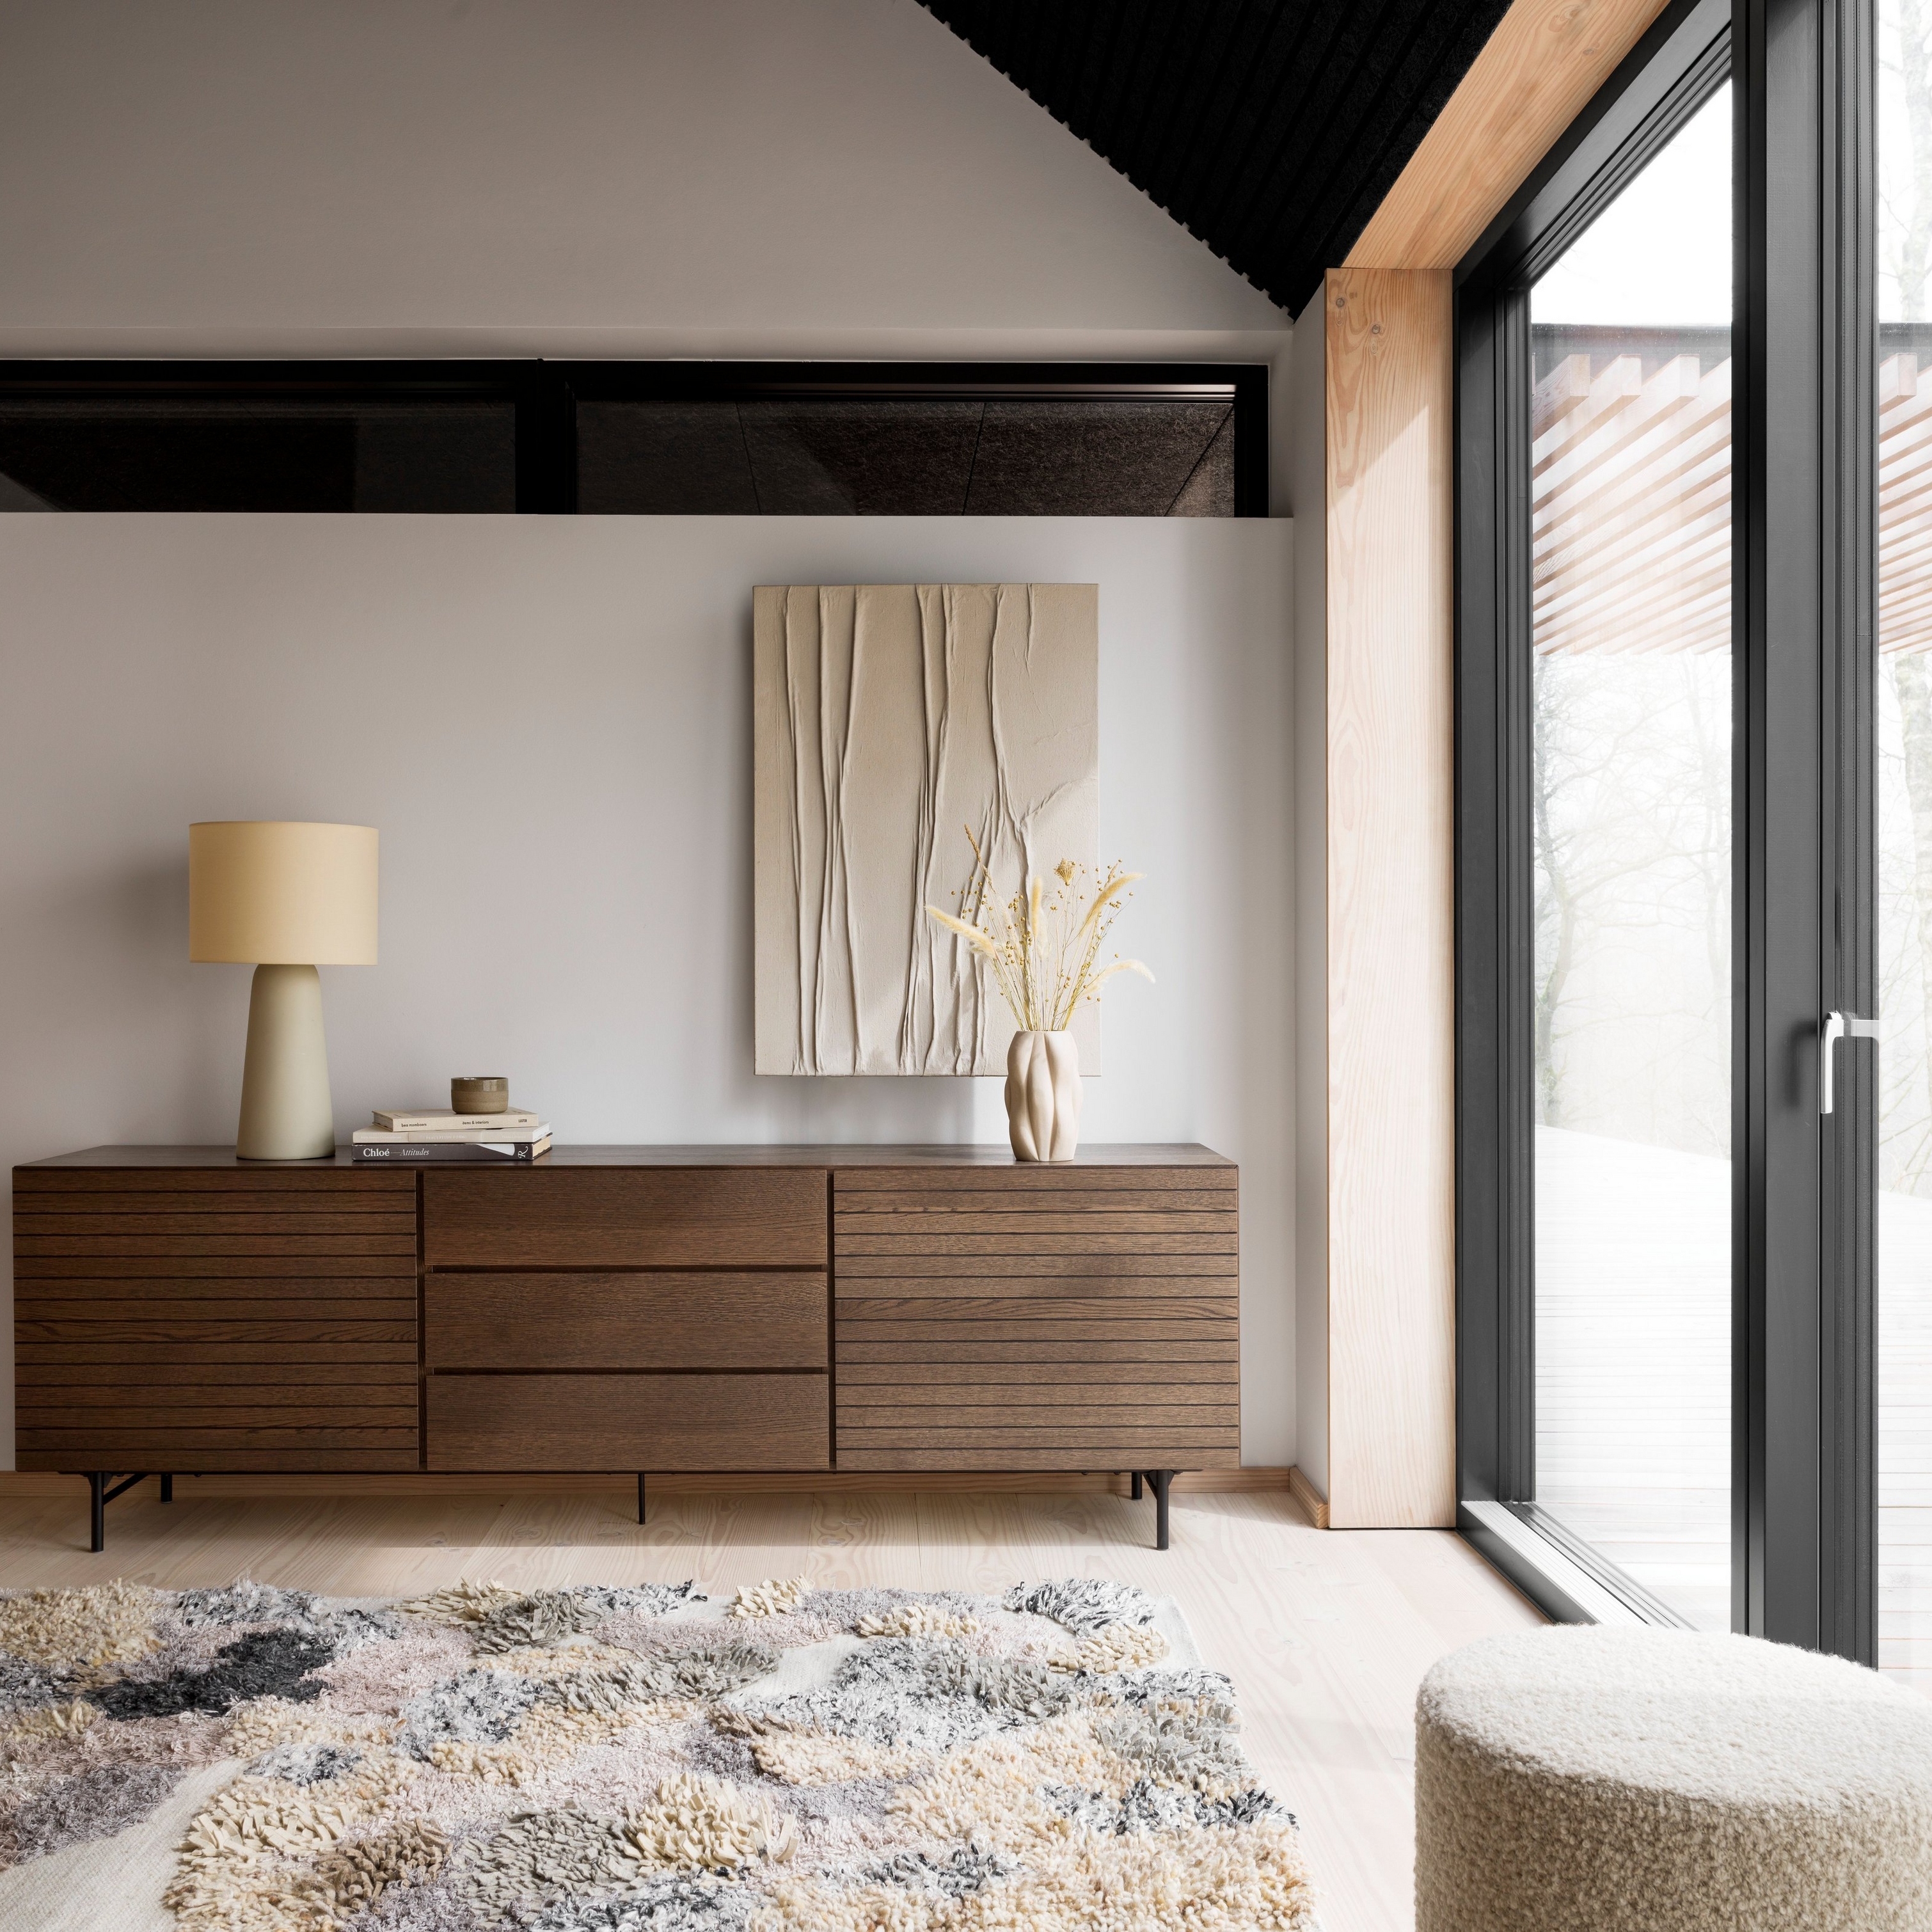 The Lugano sideboard in a dark oak veneer finish, placed against a wall.